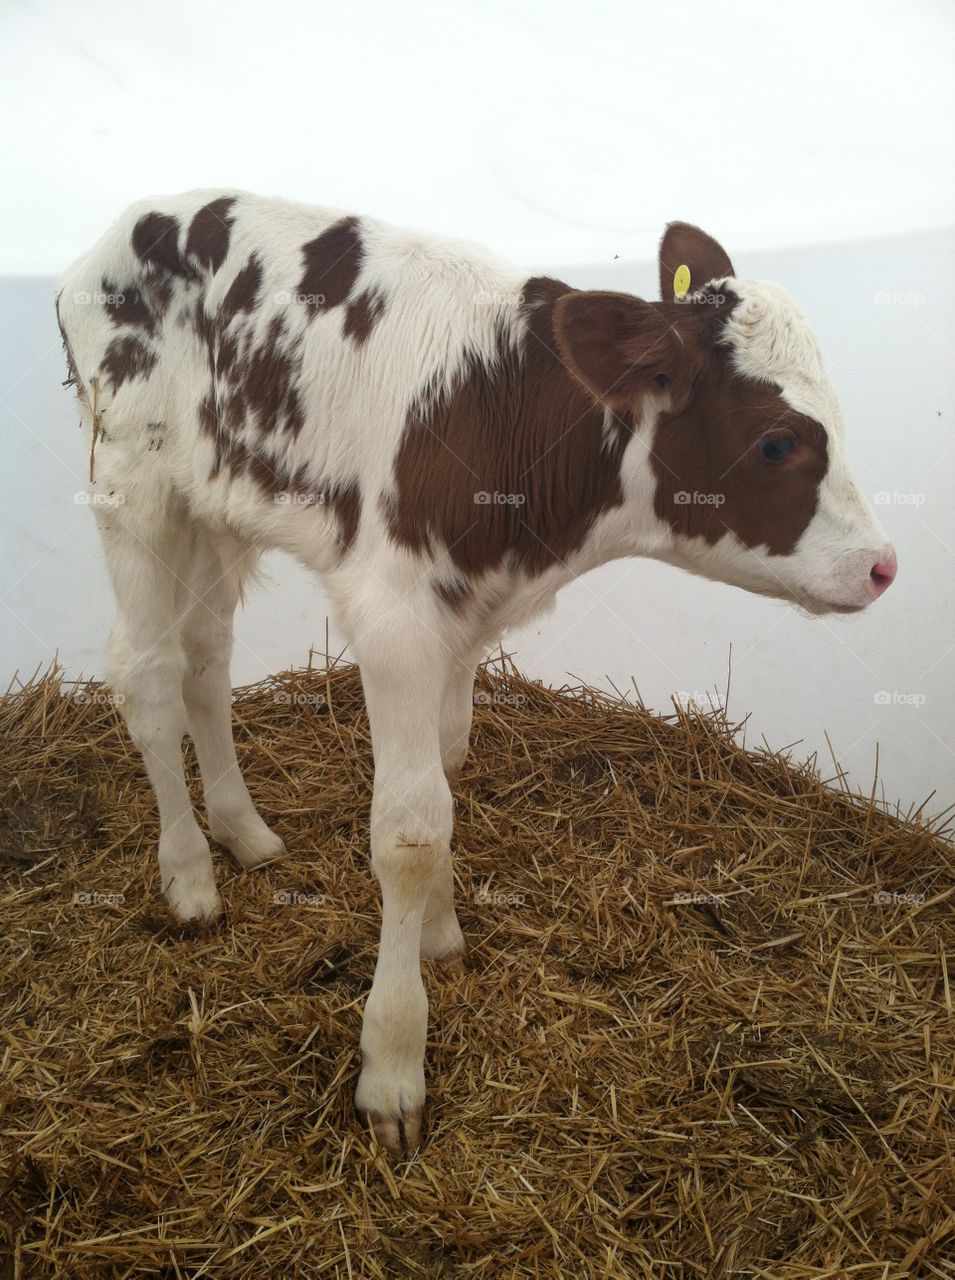 Brown and white baby cow, aka a calf with a hello tag in his ear